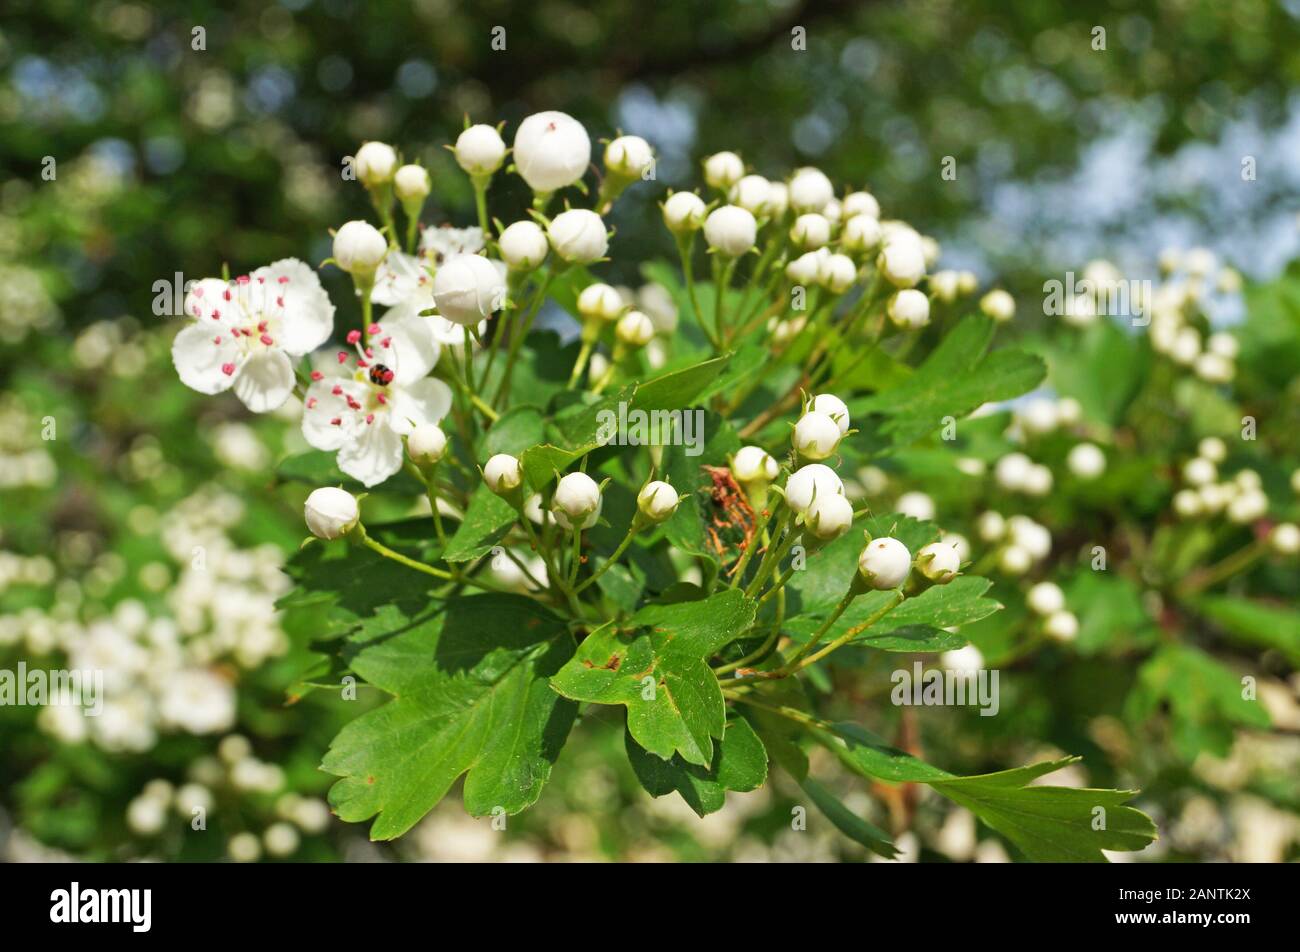 Hawthorn branch with delicate white inflorescences and green leaves on a spring day Stock Photo